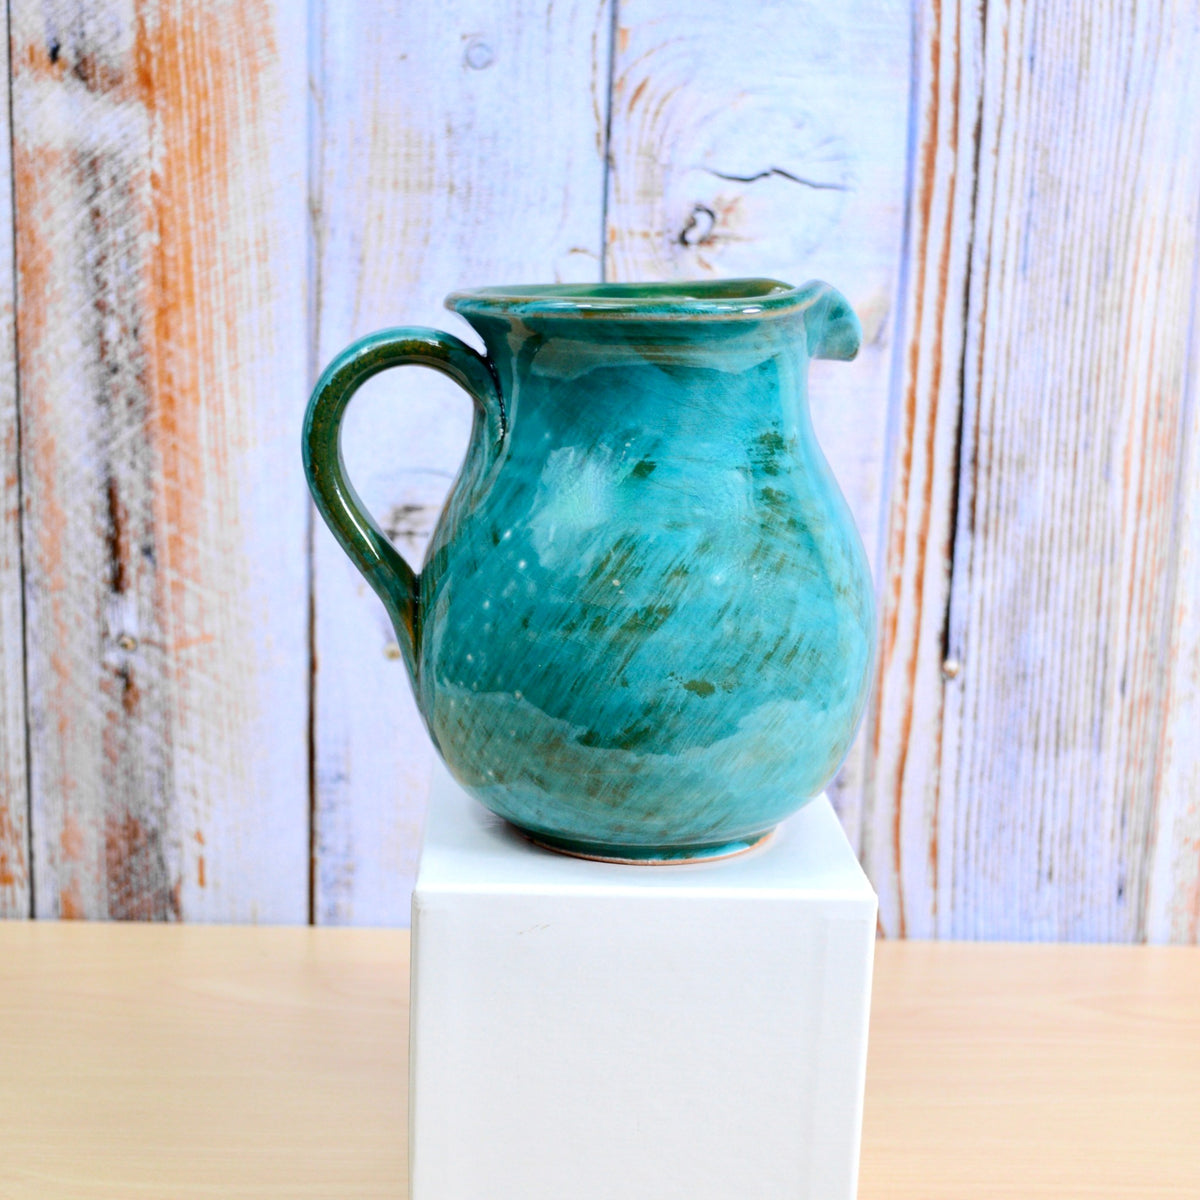 Tuscan Ceramic Small Pitcher, Multiple Colors, Made in Italy - My Italian Decor